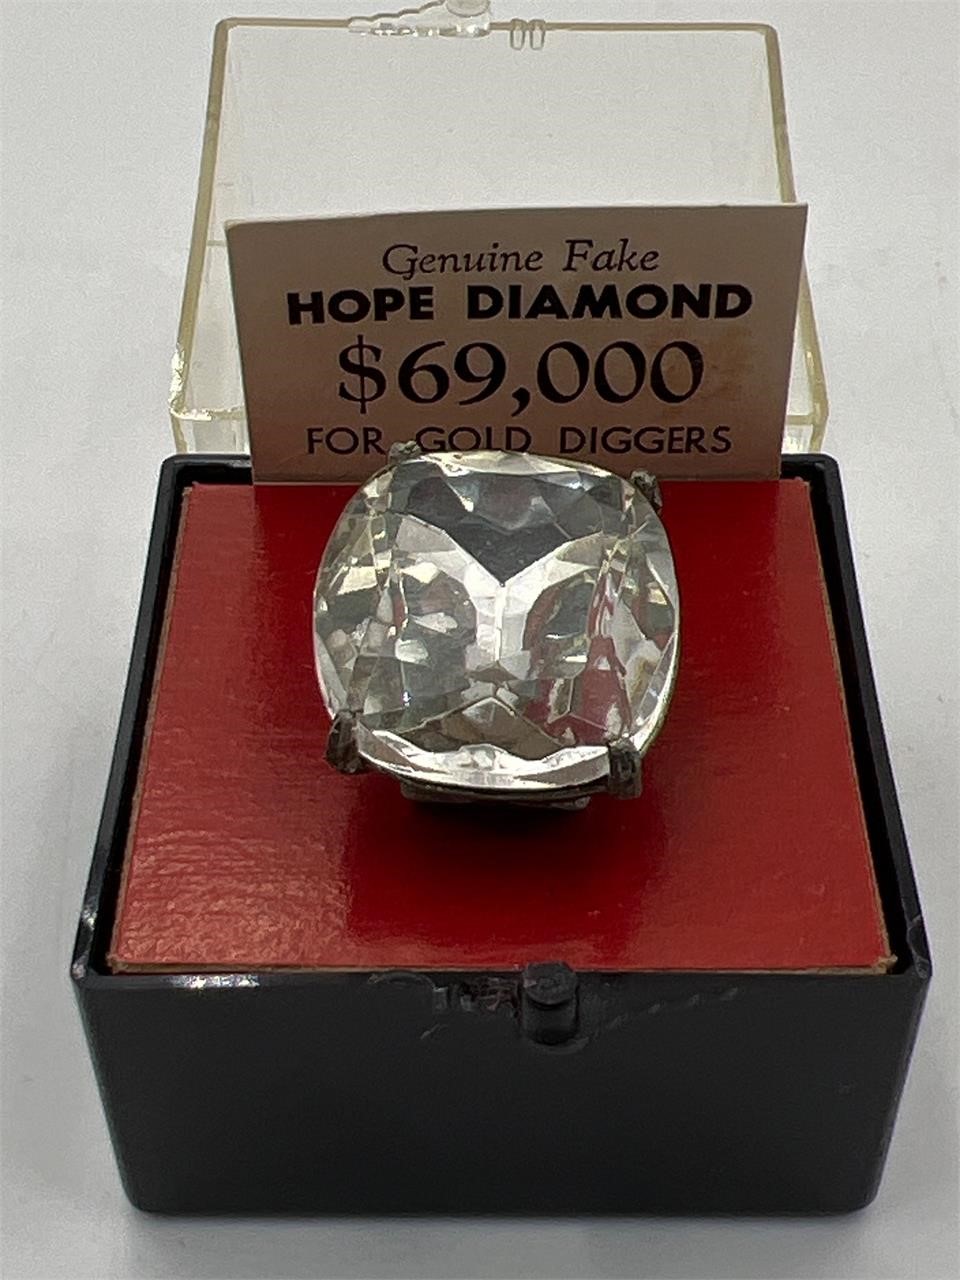 Genuine fake hope diamond for gold diggers